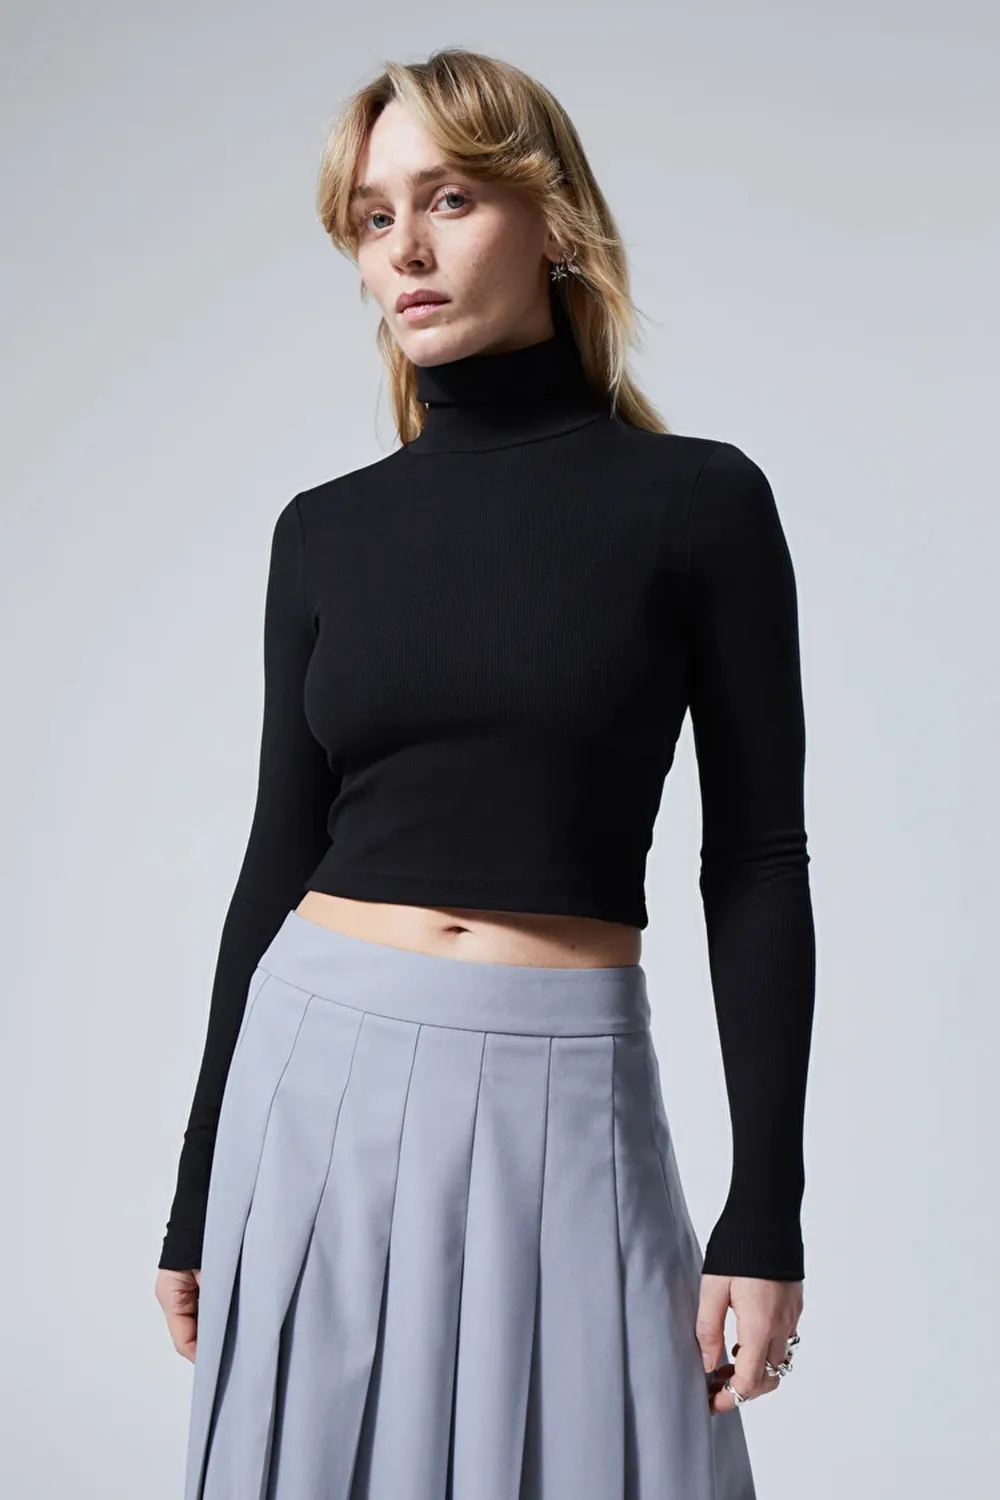 Cropped turtleneck sweater in black. Used but in very good condition. A comfortable fit (not very tight around body but arms yes). Toppar.